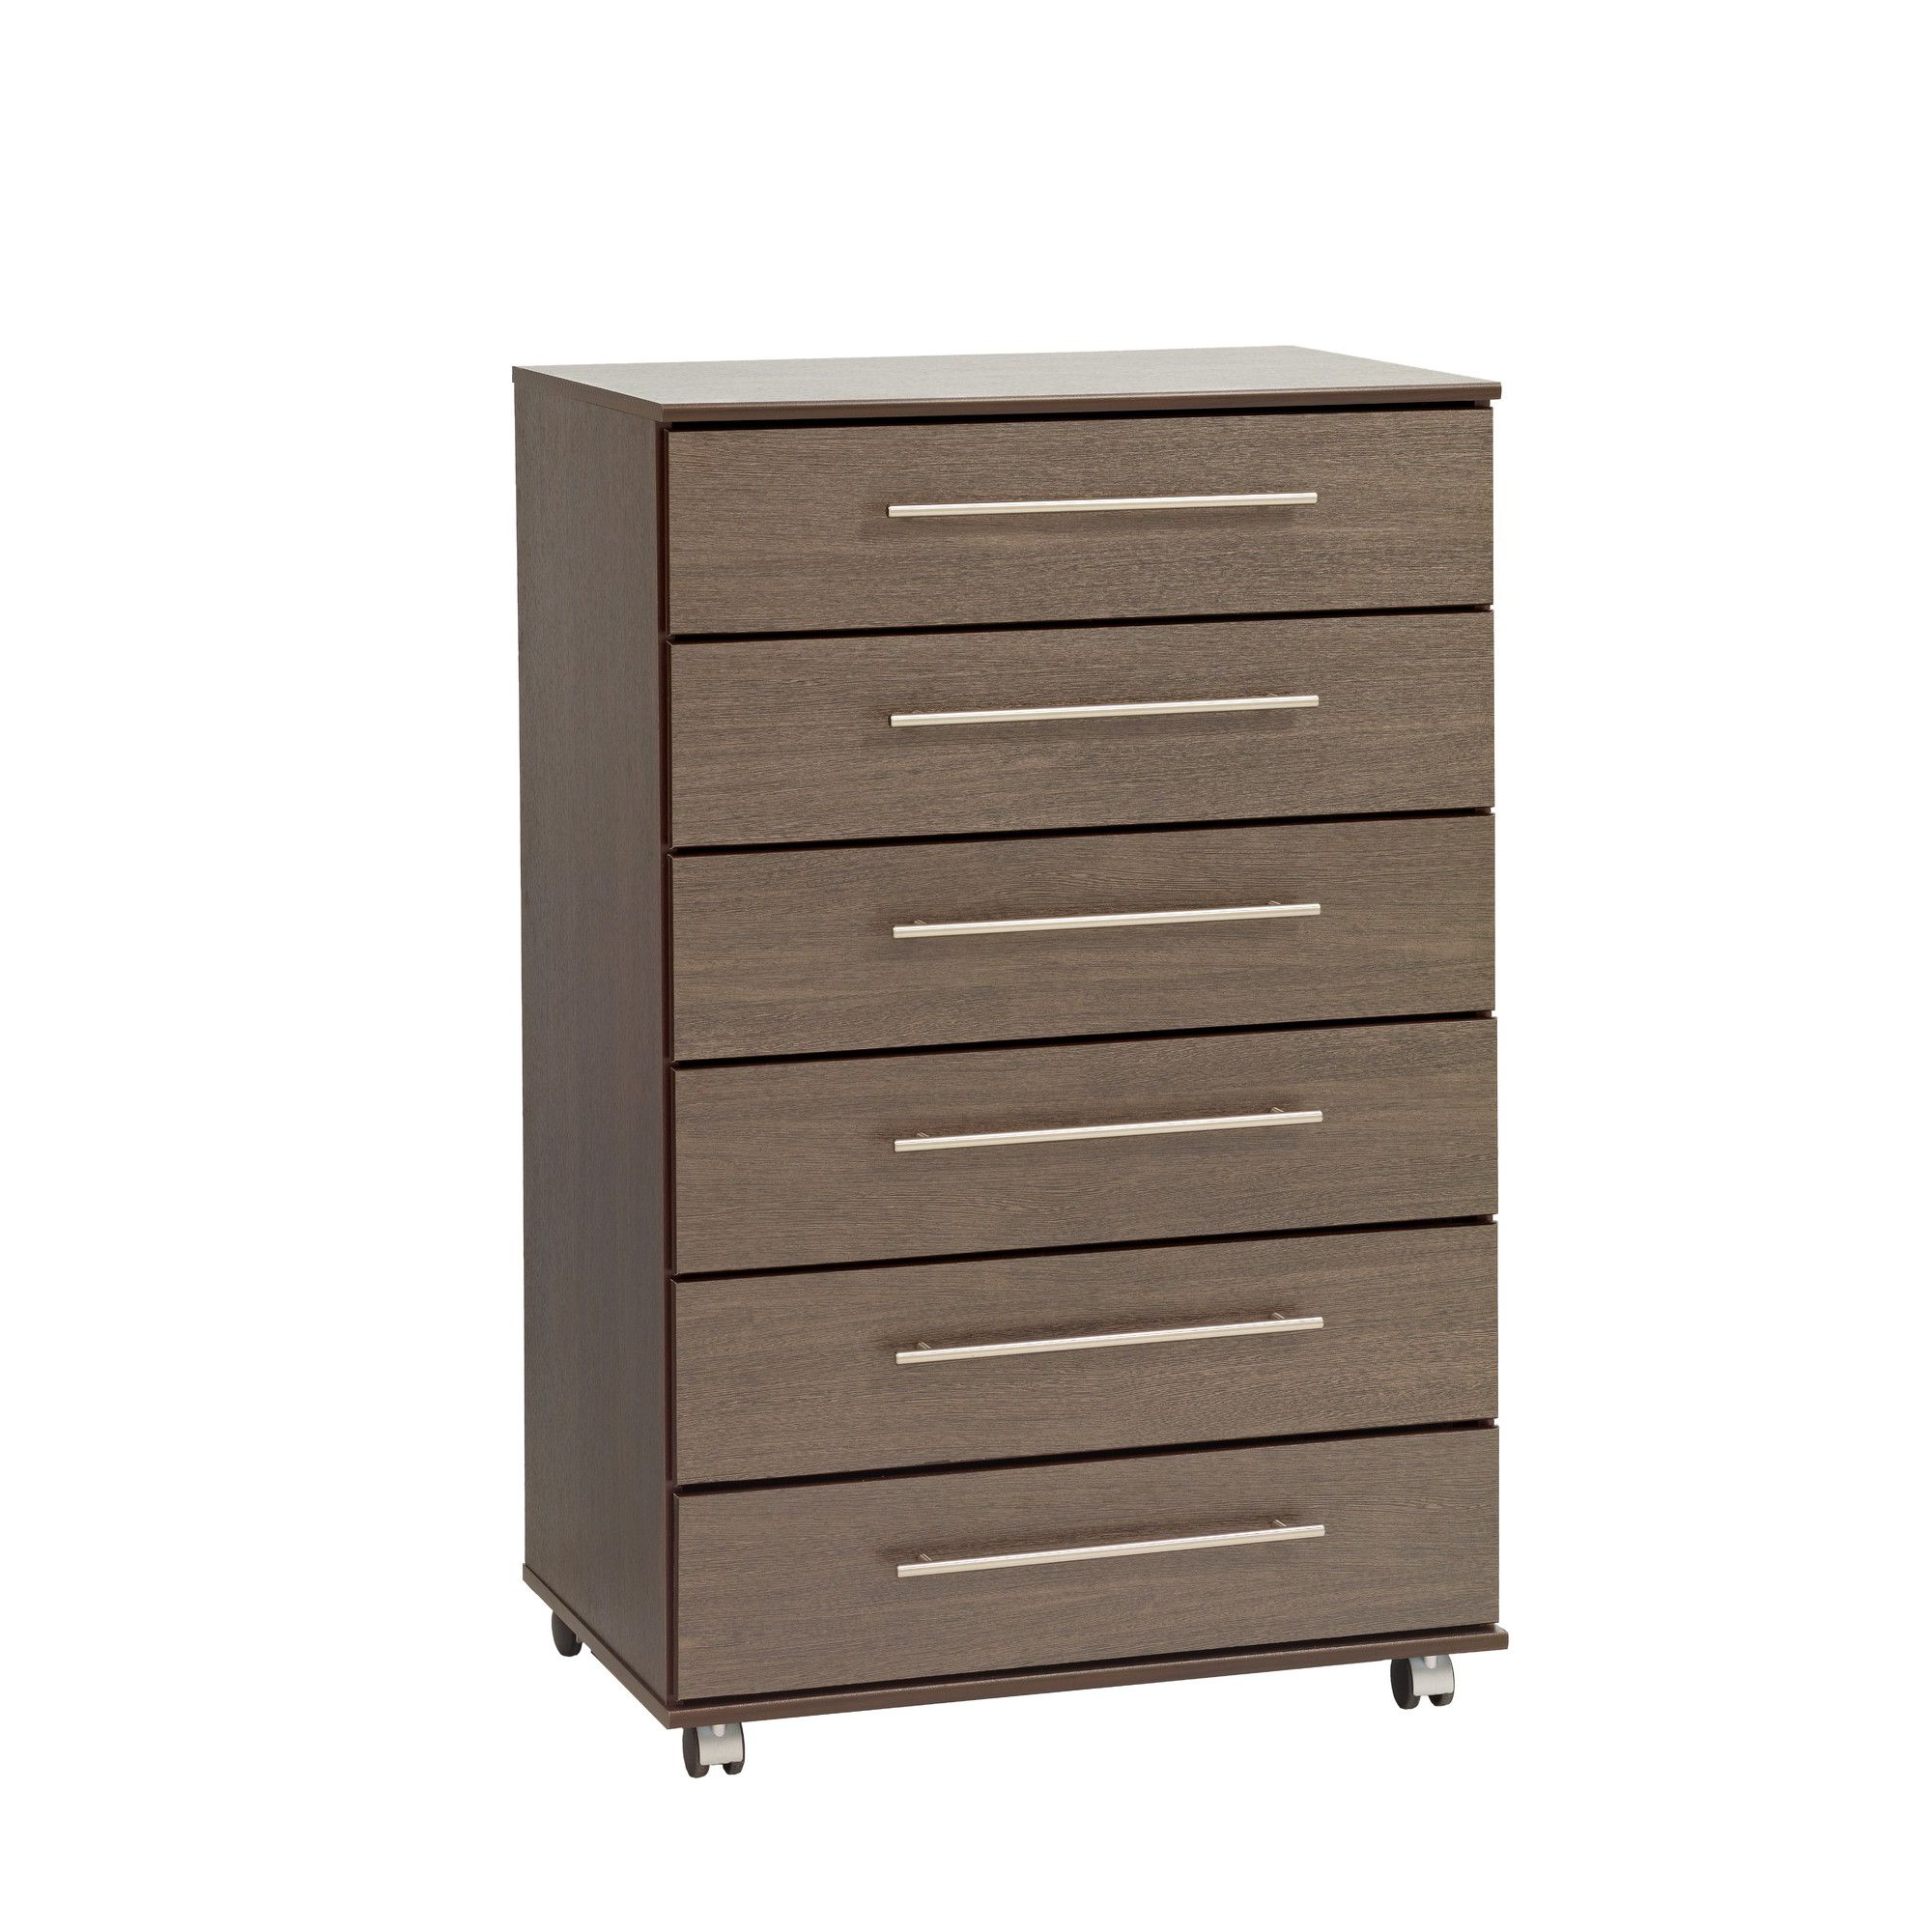 Ideal Furniture New York 6 Drawer chest - Beech at Tesco Direct